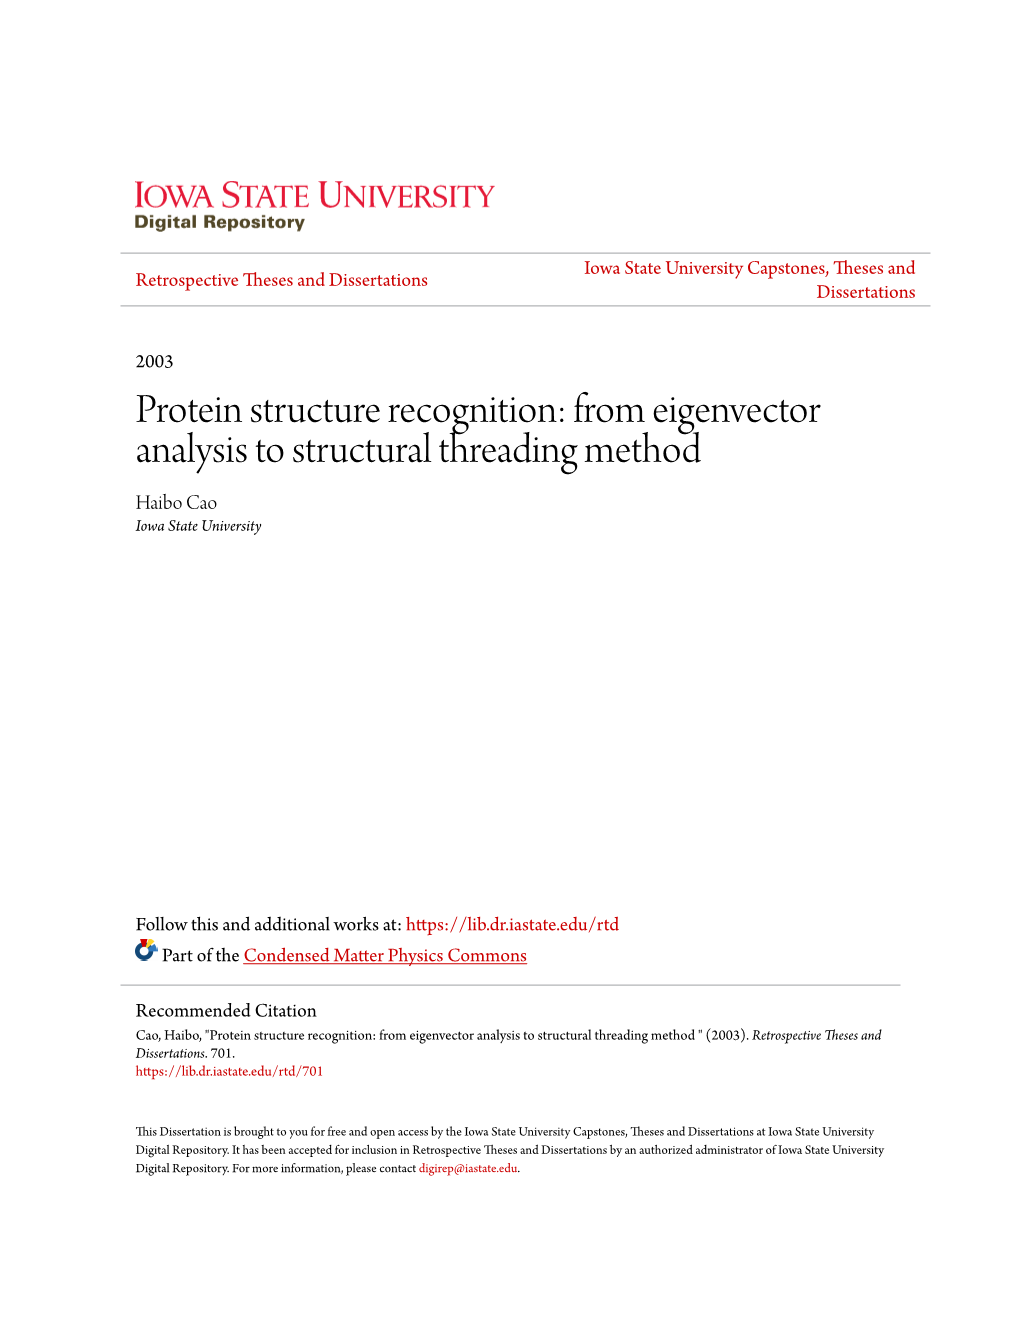 Protein Structure Recognition: from Eigenvector Analysis to Structural Threading Method Haibo Cao Iowa State University